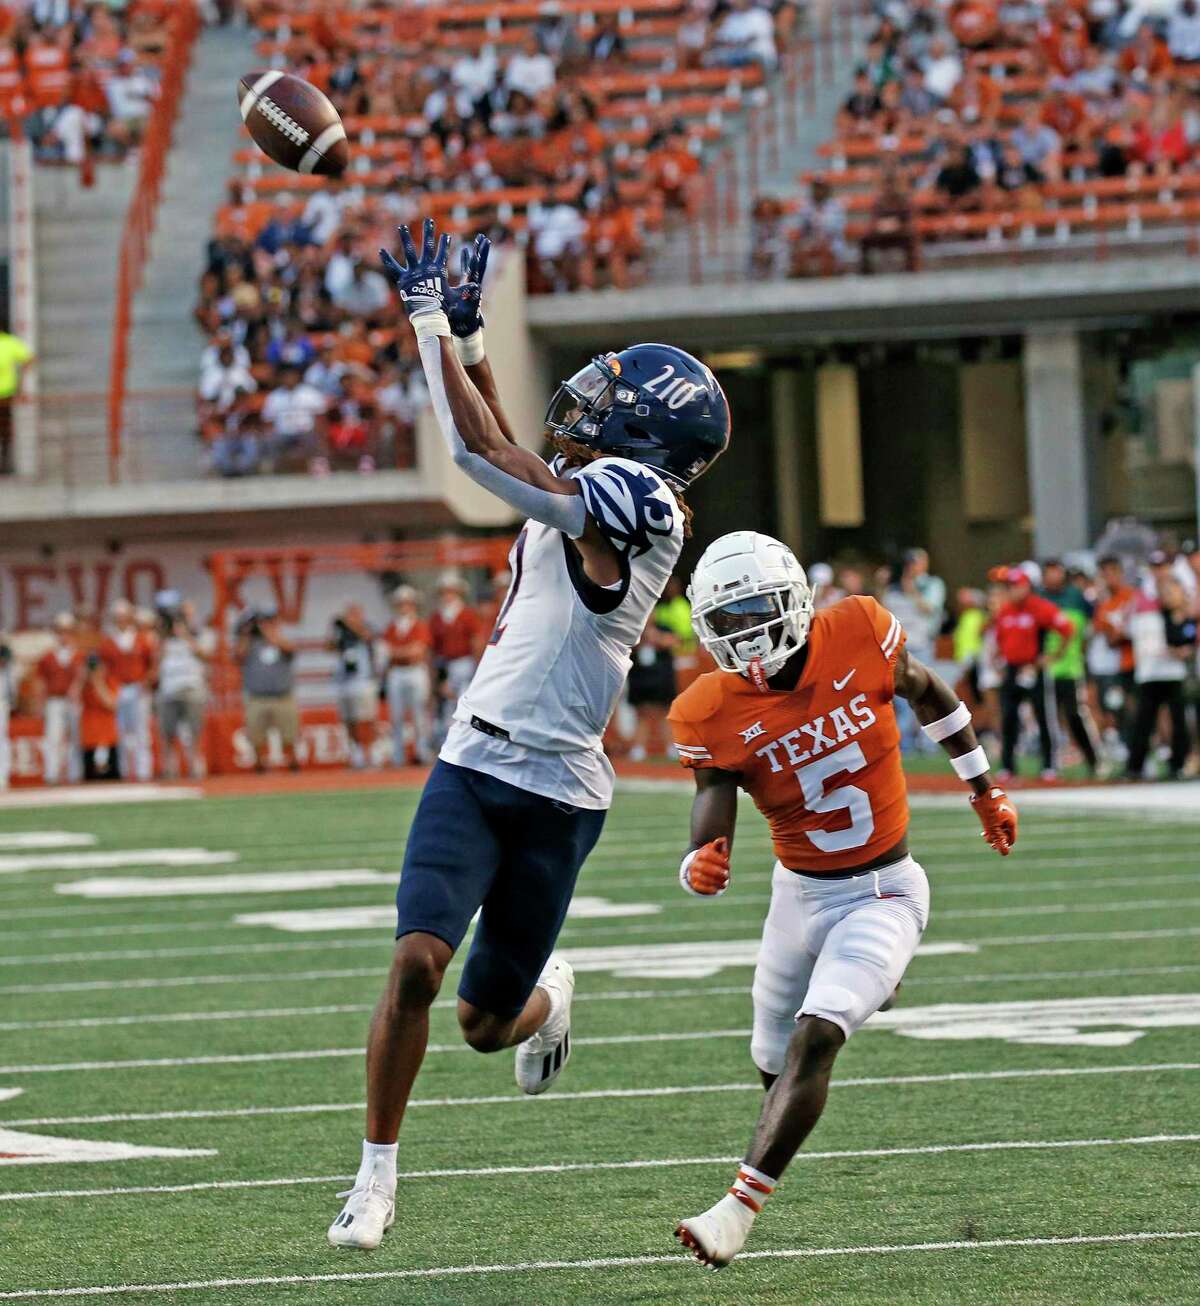 Wide receiver Joshua Cephus #2 of the UTSA Roadrunners makes a reception for an apparent touchdown until the play was nullified due to a penalty on Saturday, Sept. 17, 2022 at Darrell K Royal Memorial Stadium. Texas defeated UTSA 41-20